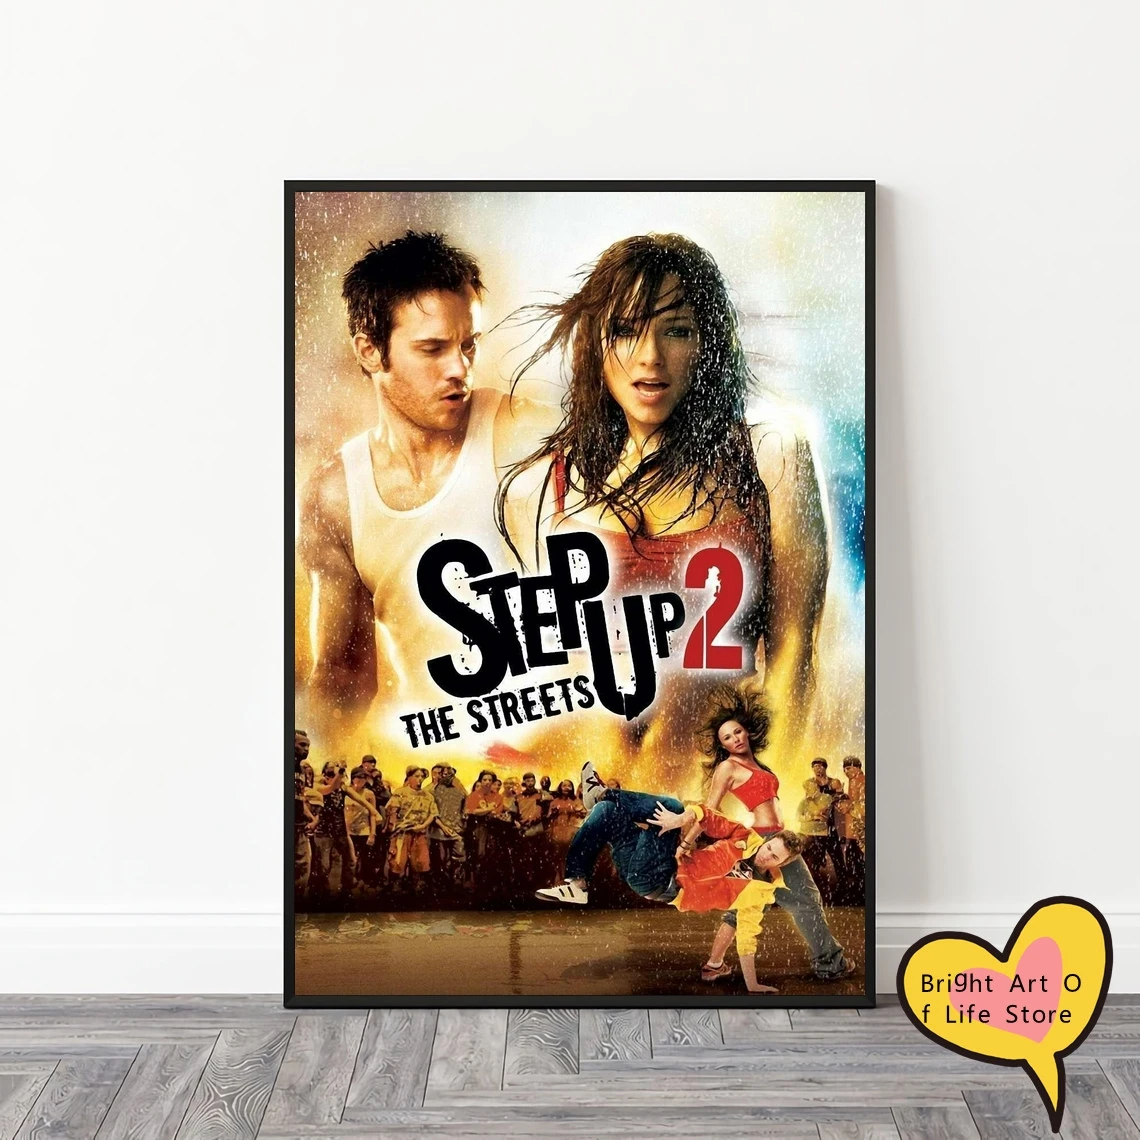 

Step Up 2 The Streets (2008) Movie Poster Cover Photo Print Canvas Wall Art Home Decor (Unframed)